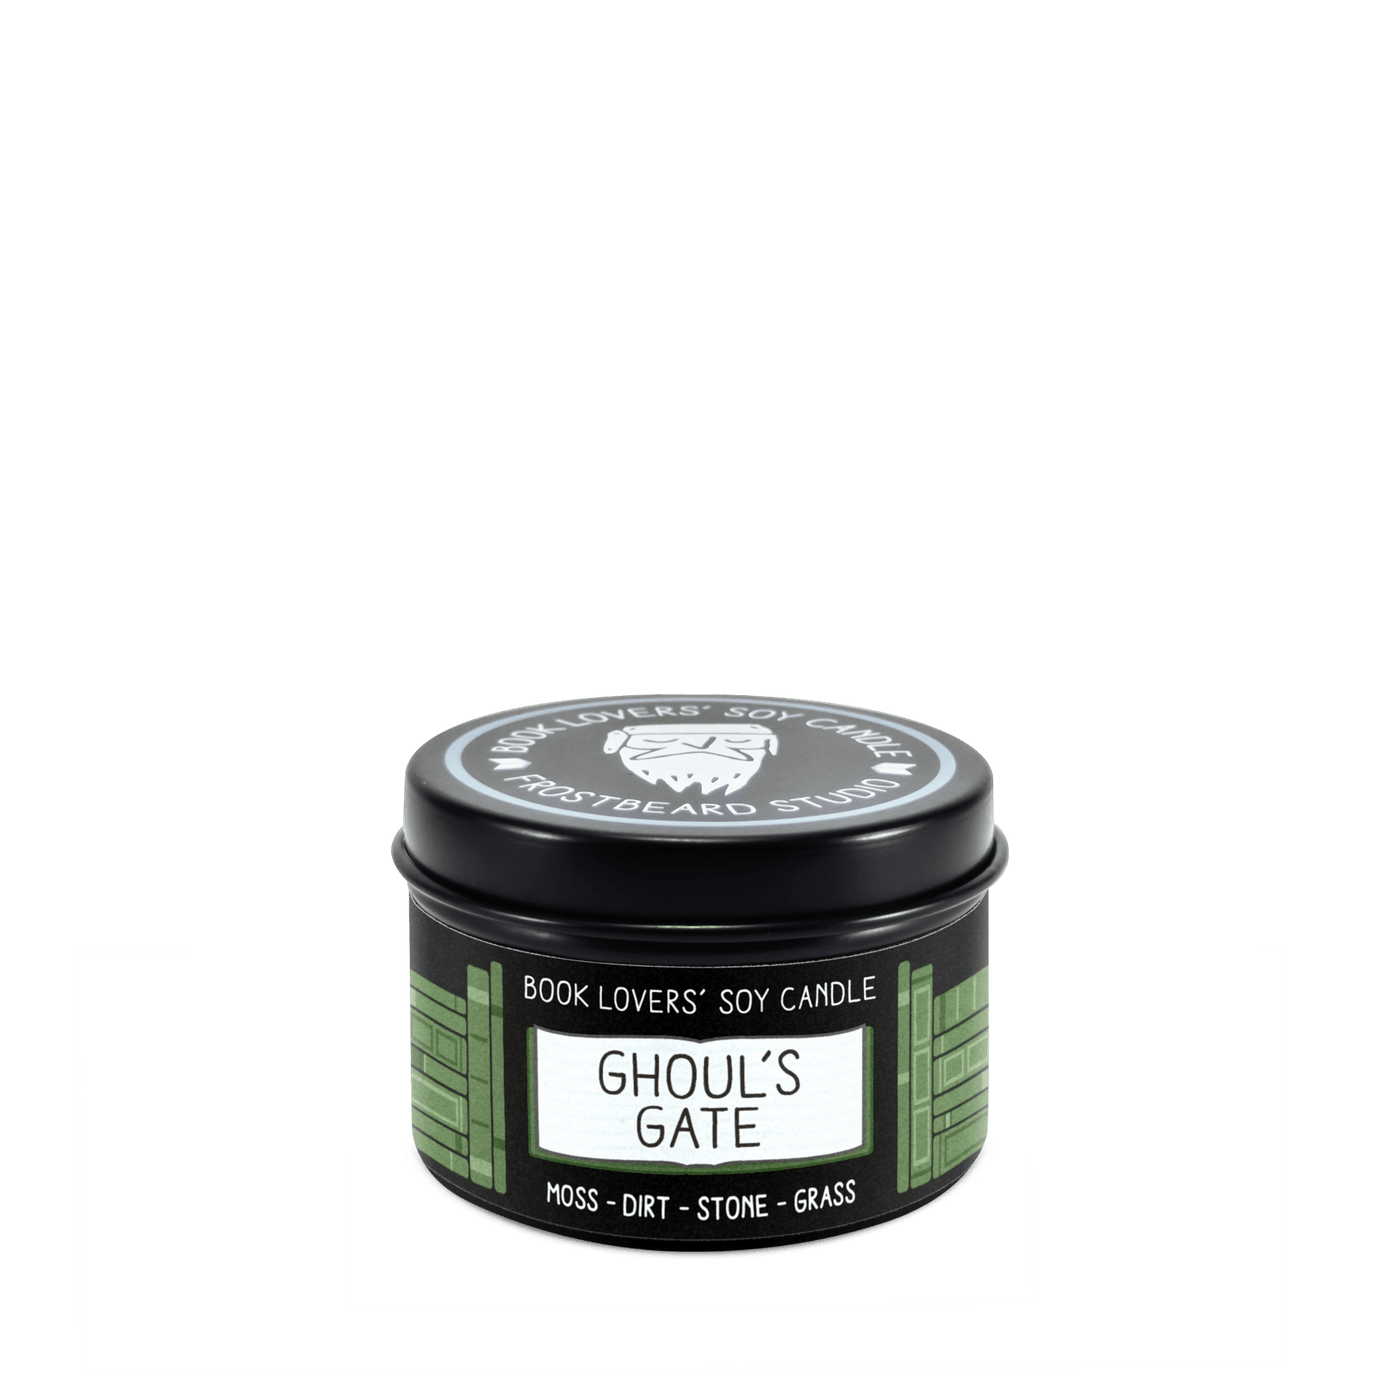 Ghoul's Gate - 2 oz Tin - Book Lovers' Soy Candle - Frostbeard Studio